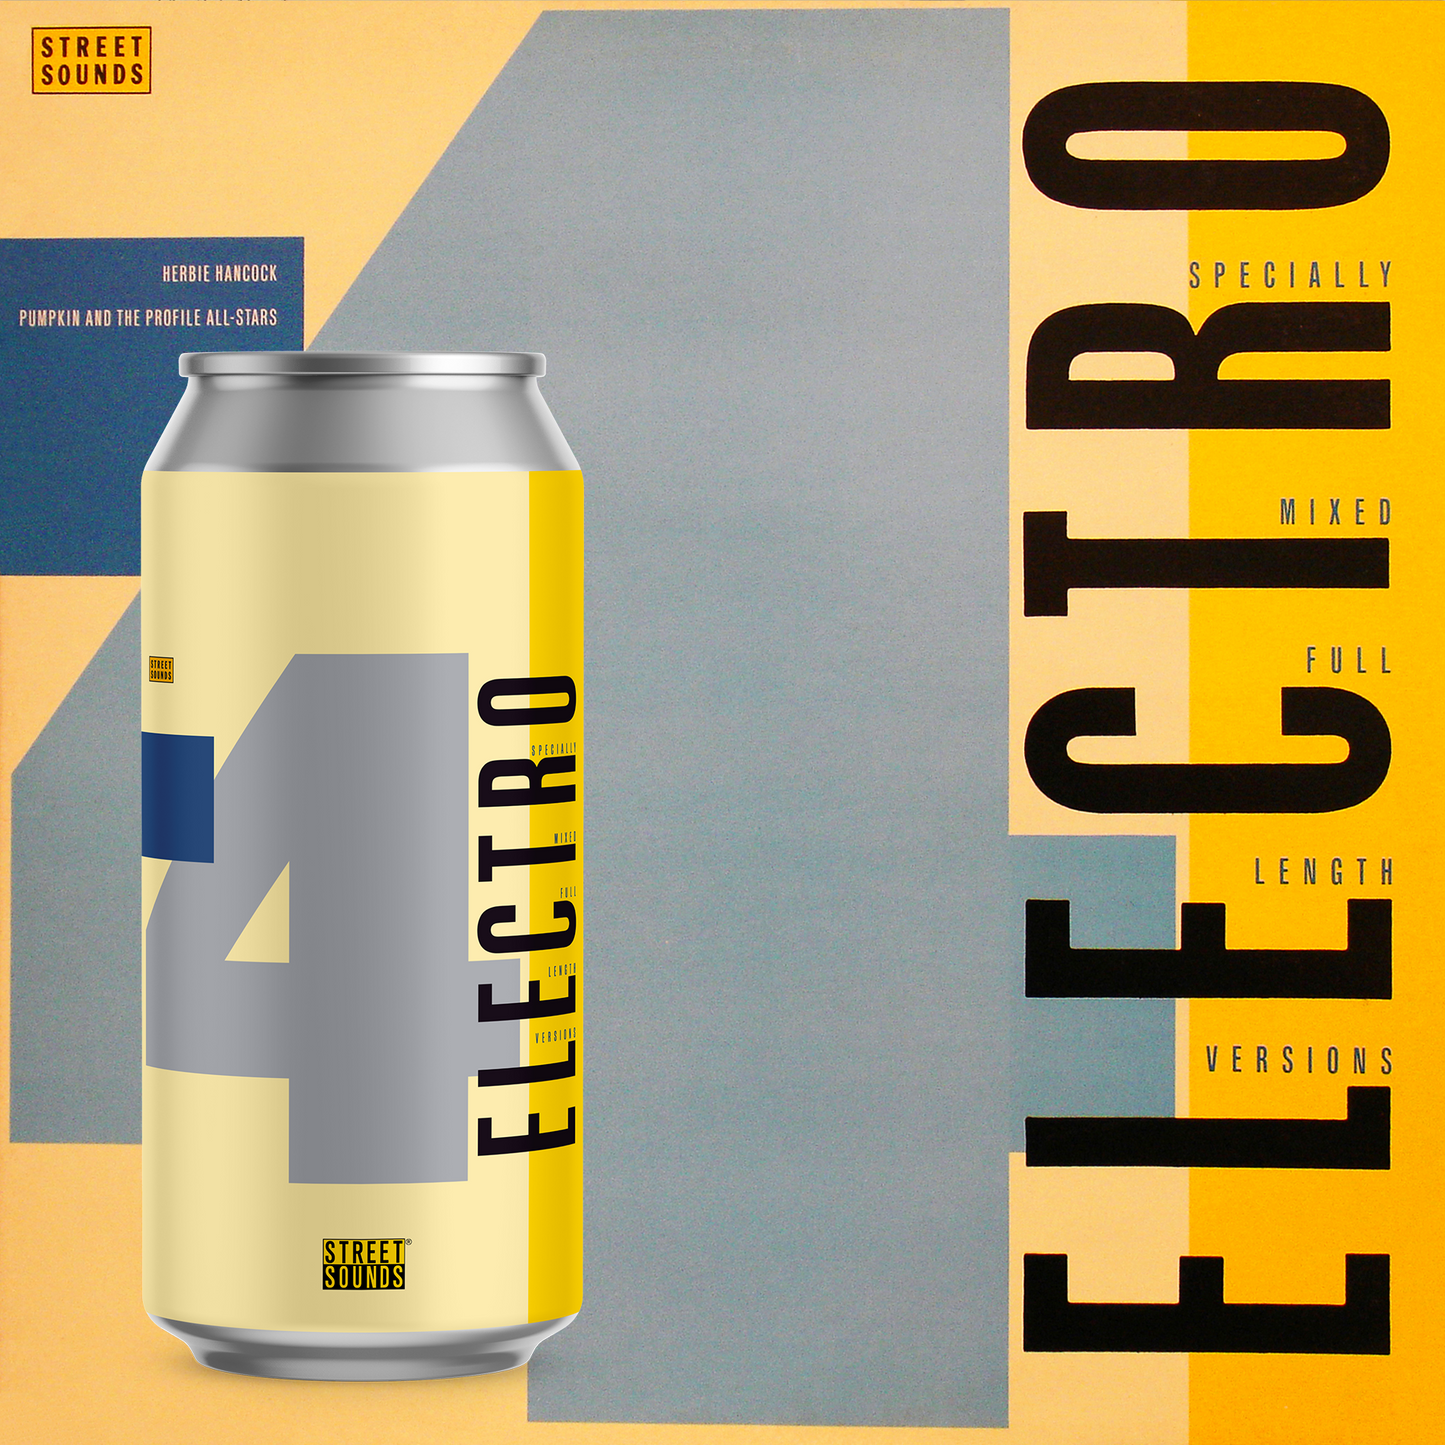 Pick 'N' Mix Electro 4 ( 1 can *ONLY* of Electro 4)